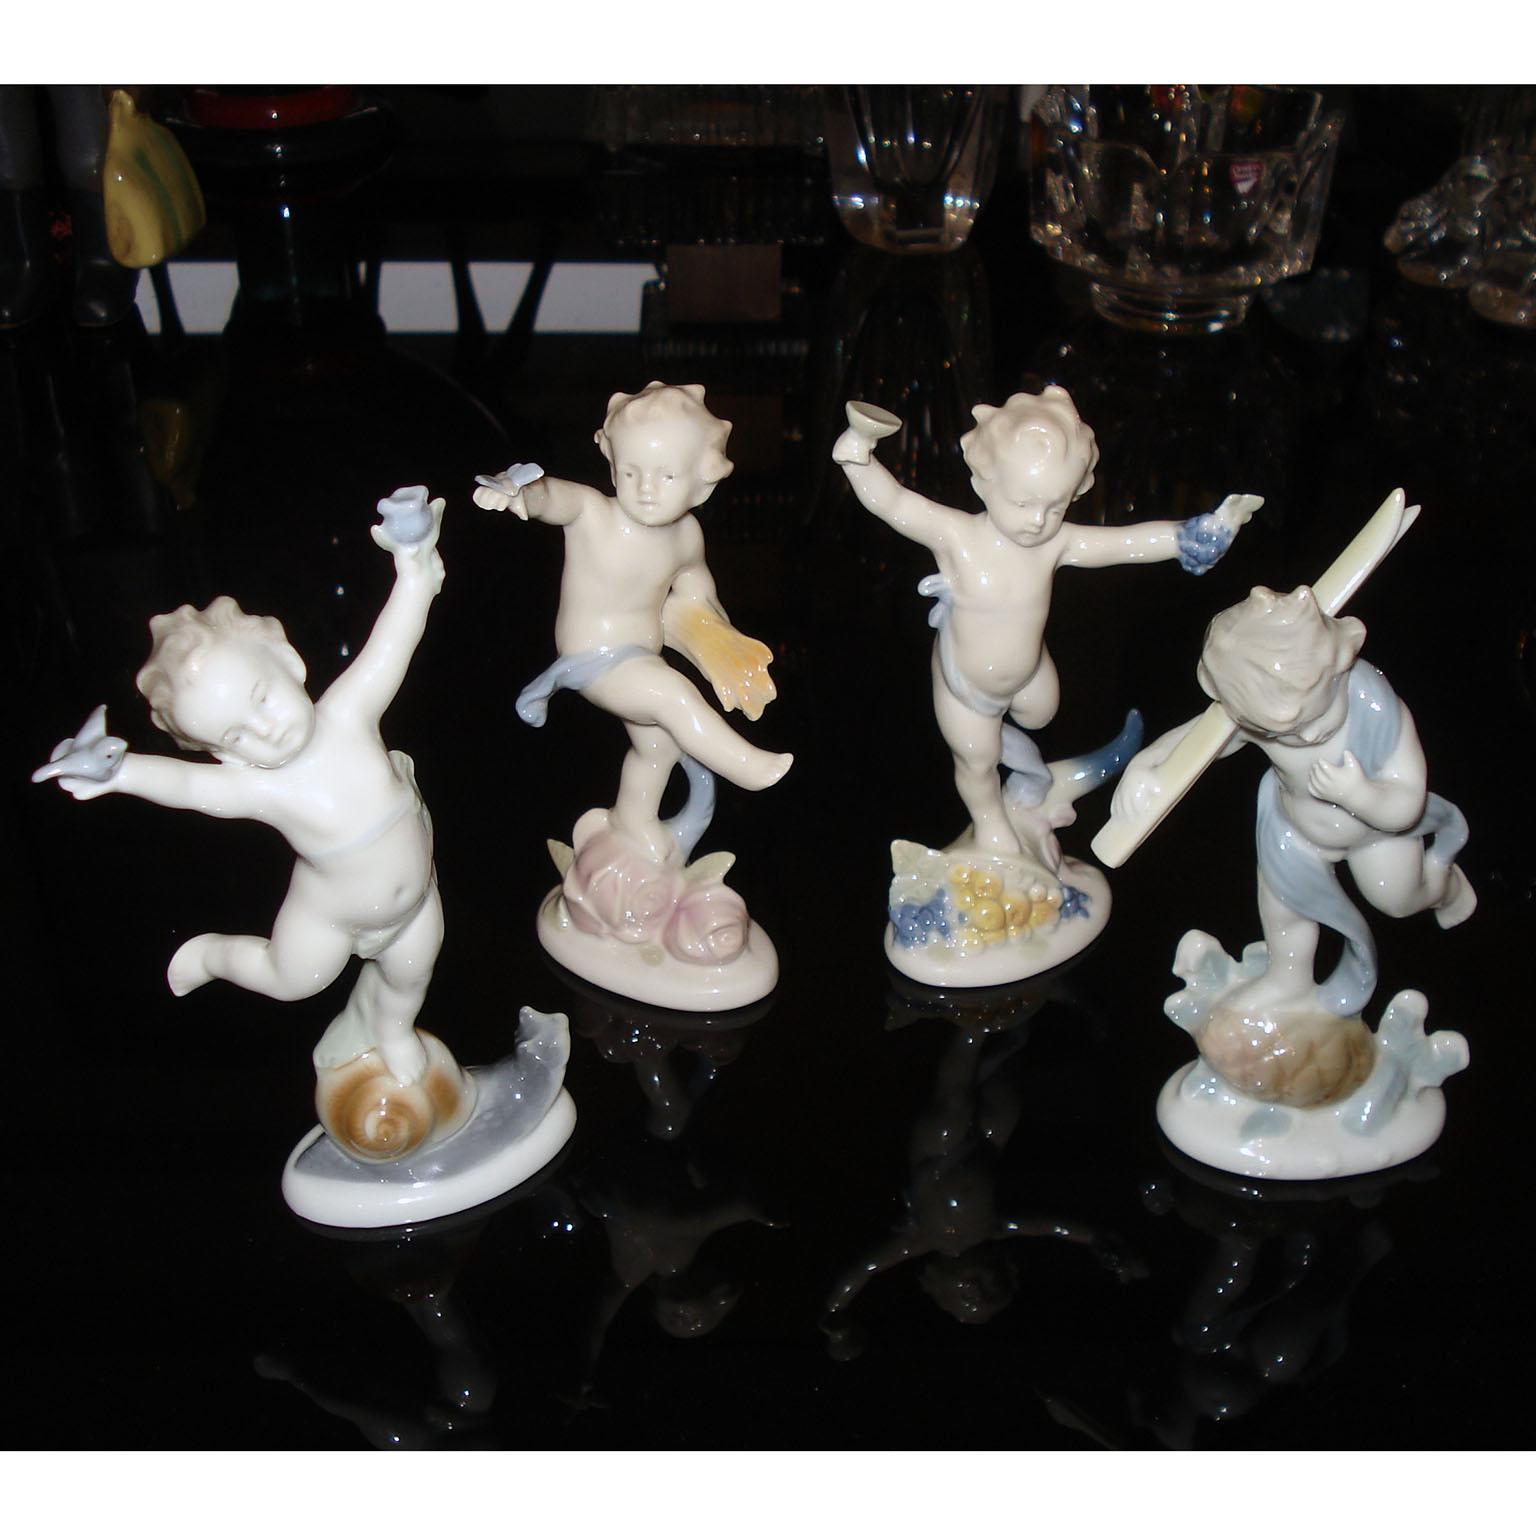 Metzler & Ortloff, Ilmenau - Porcelain figurines: the four seasons
Four putti figurines depicting the Four Seasons, German porcelain. Each marked under the bottom. 
Made of high quality porcelain, with great attention to detail
Height circa 14 cm